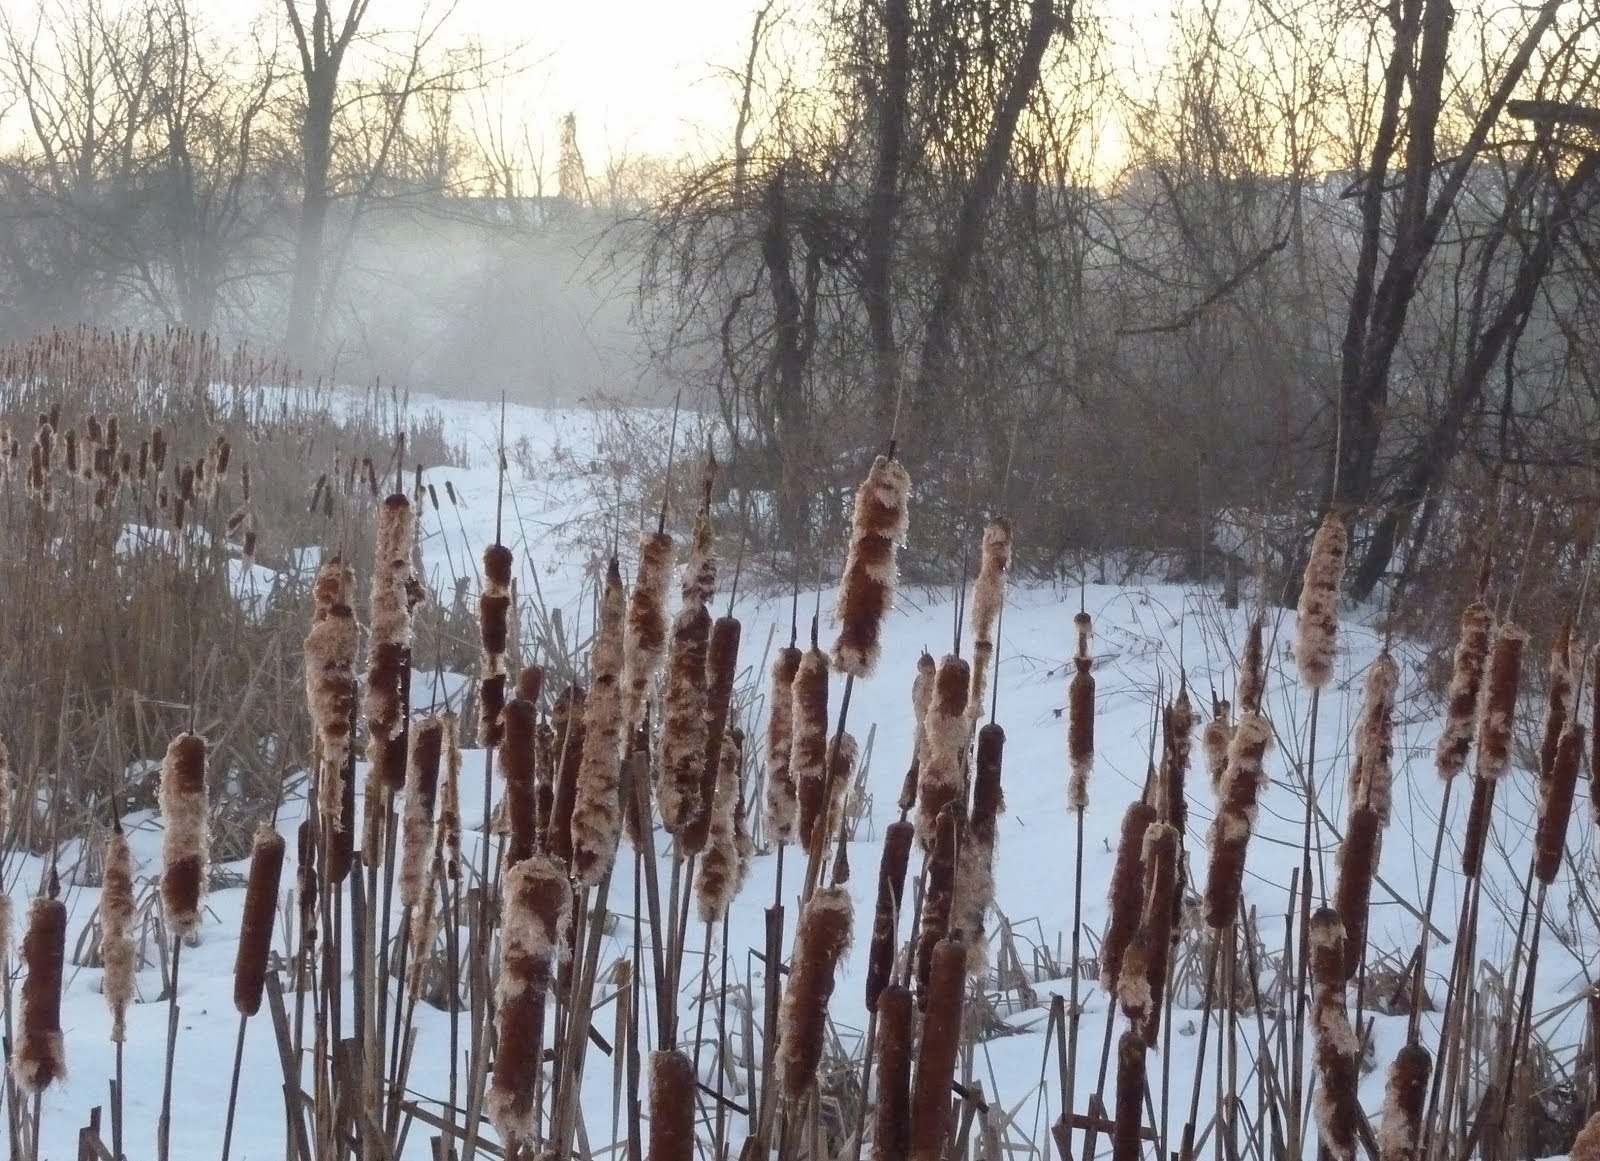 Cattails on the Little Cacoosing